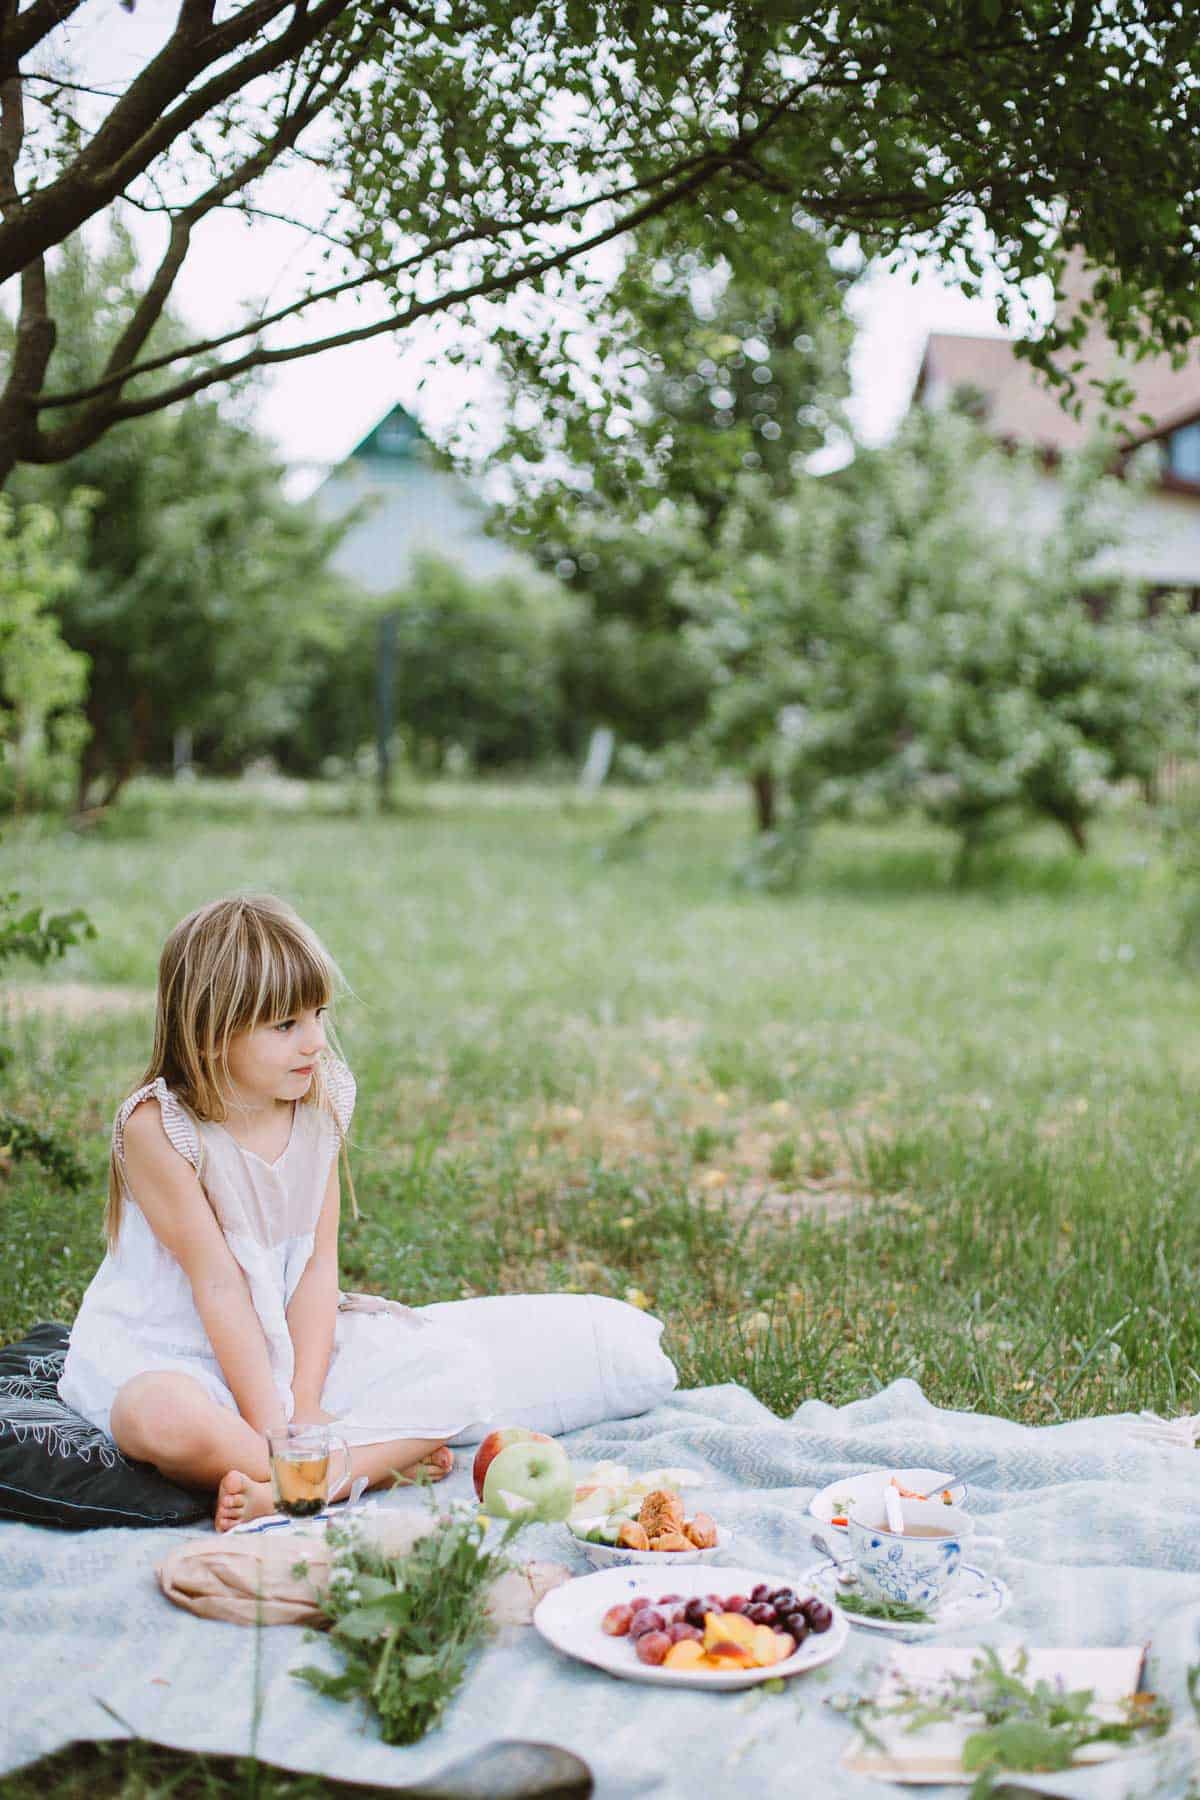 A little girl sitting on a blanket eating a picnic.